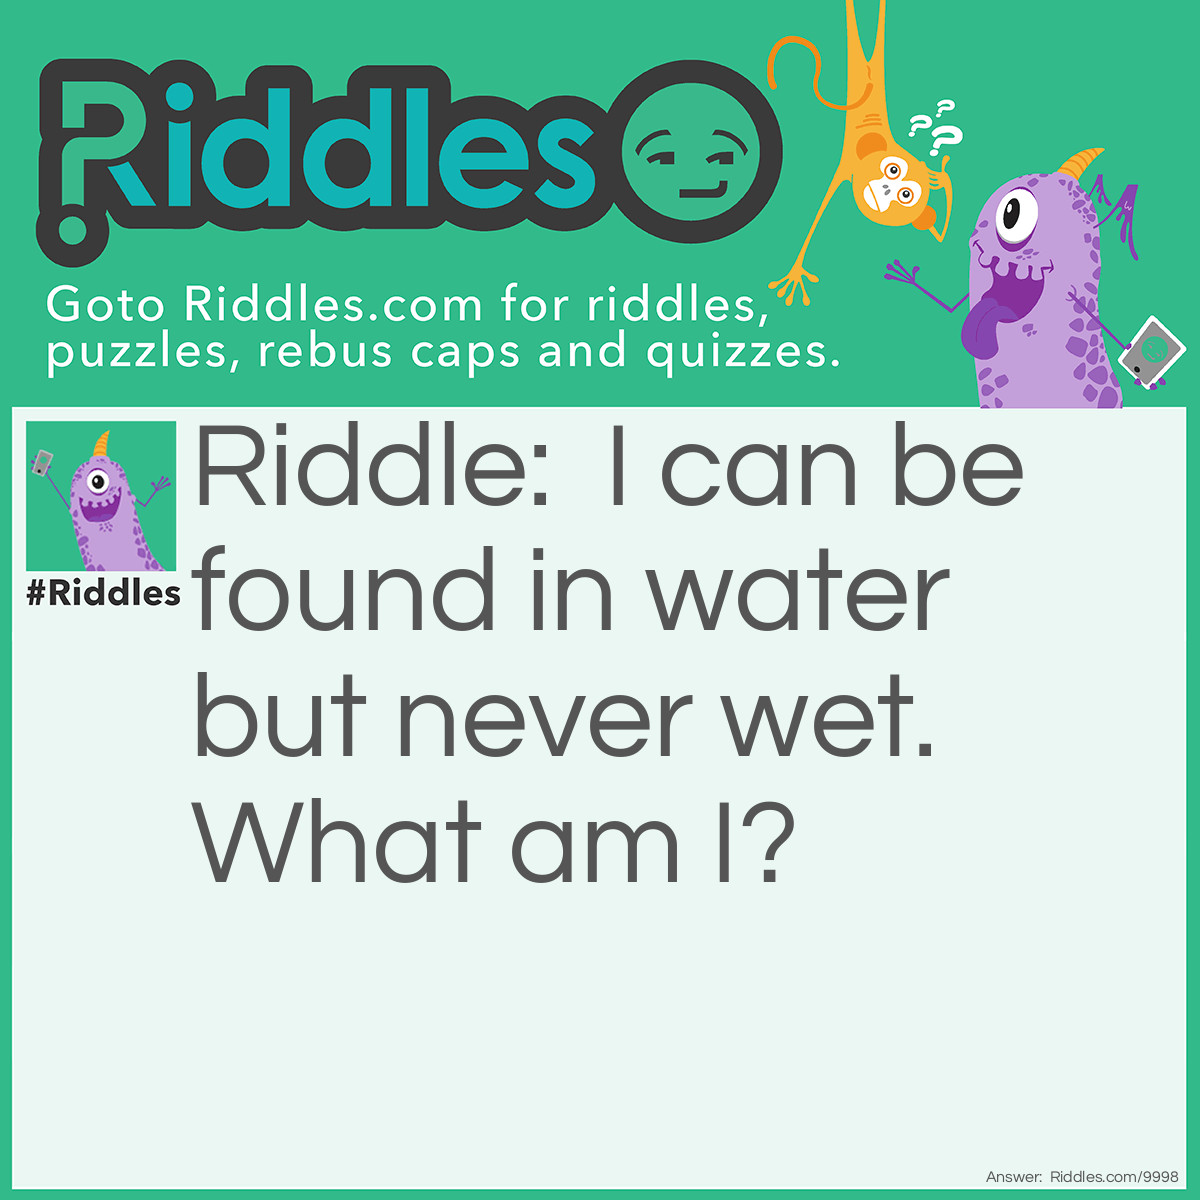 Riddle: I can be found in water but never wet. What am I? Answer: A reflection.